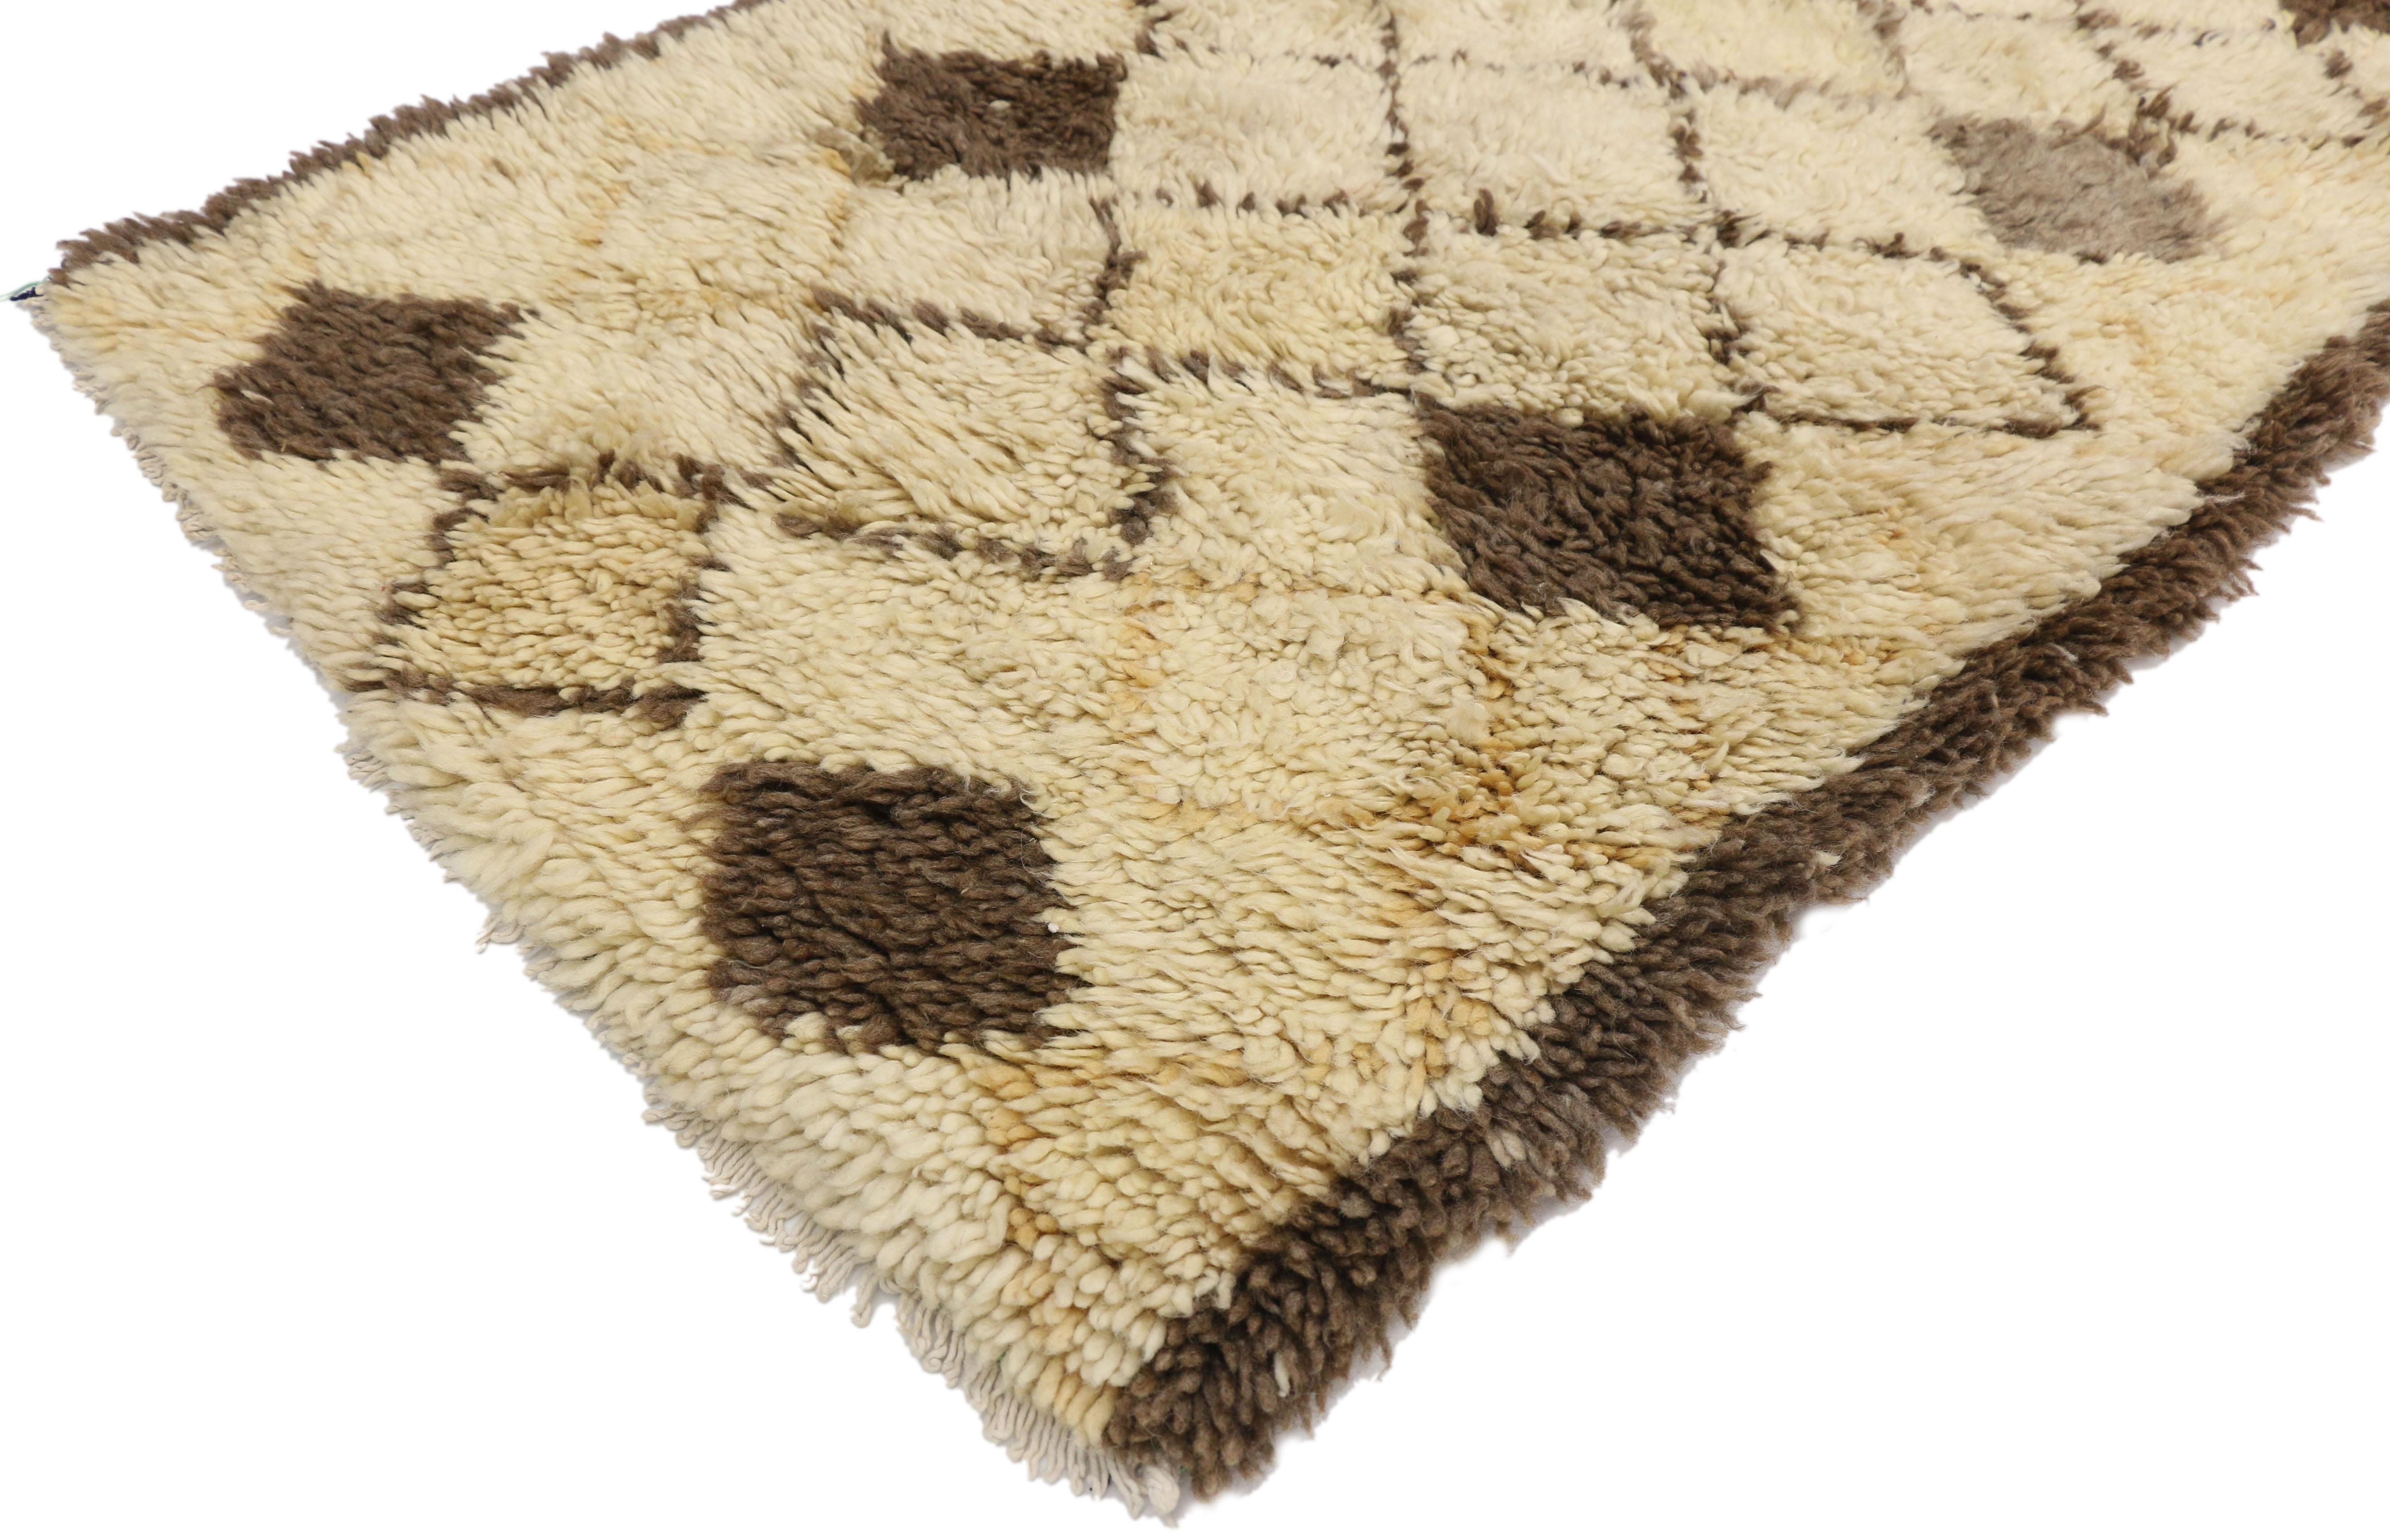 20862 Vintage Moroccan Azilal rug, Neutral Berber Moroccan rug with Neutral Colors 02'07 x 06'01. This hand knotted wool vintage Moroccan Azilal rug features five columns of diamond lattices unfolding across the middle of an abrashed cream field.